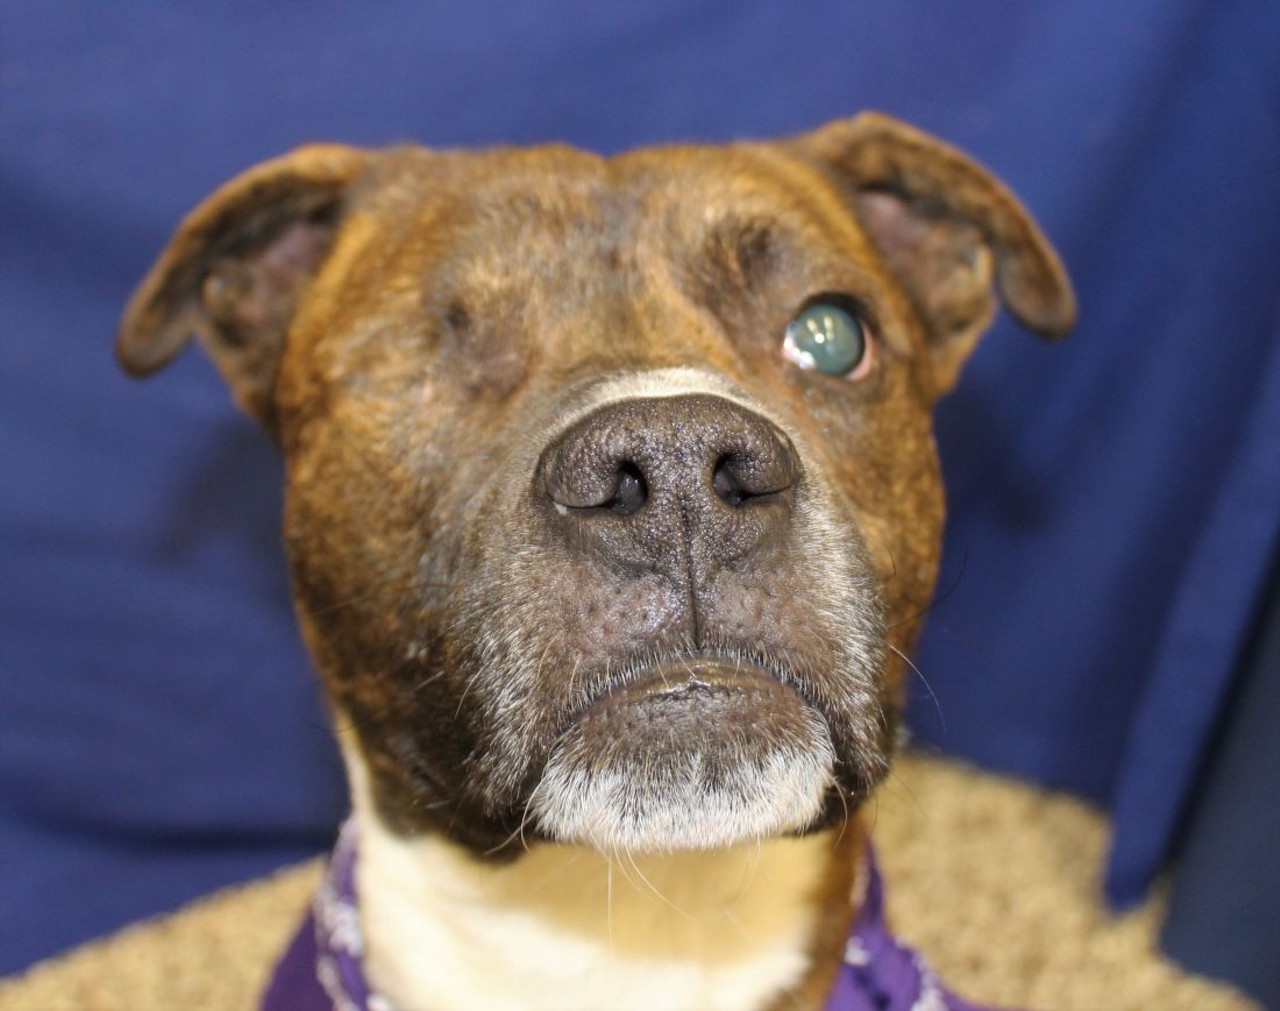 NAME: Jack
GENDER: Male
BREED: Pit Bull Terrier
AGE: 1 year
WEIGHT: 55 pounds
SPECIAL CONSIDERATIONS: Partial blindness
REASON I CAME TO MHS: Homeless and injured in Detroit
LOCATION: Petco of Sterling Heights
ID NUMBER: 864456
DETAILS: Click here